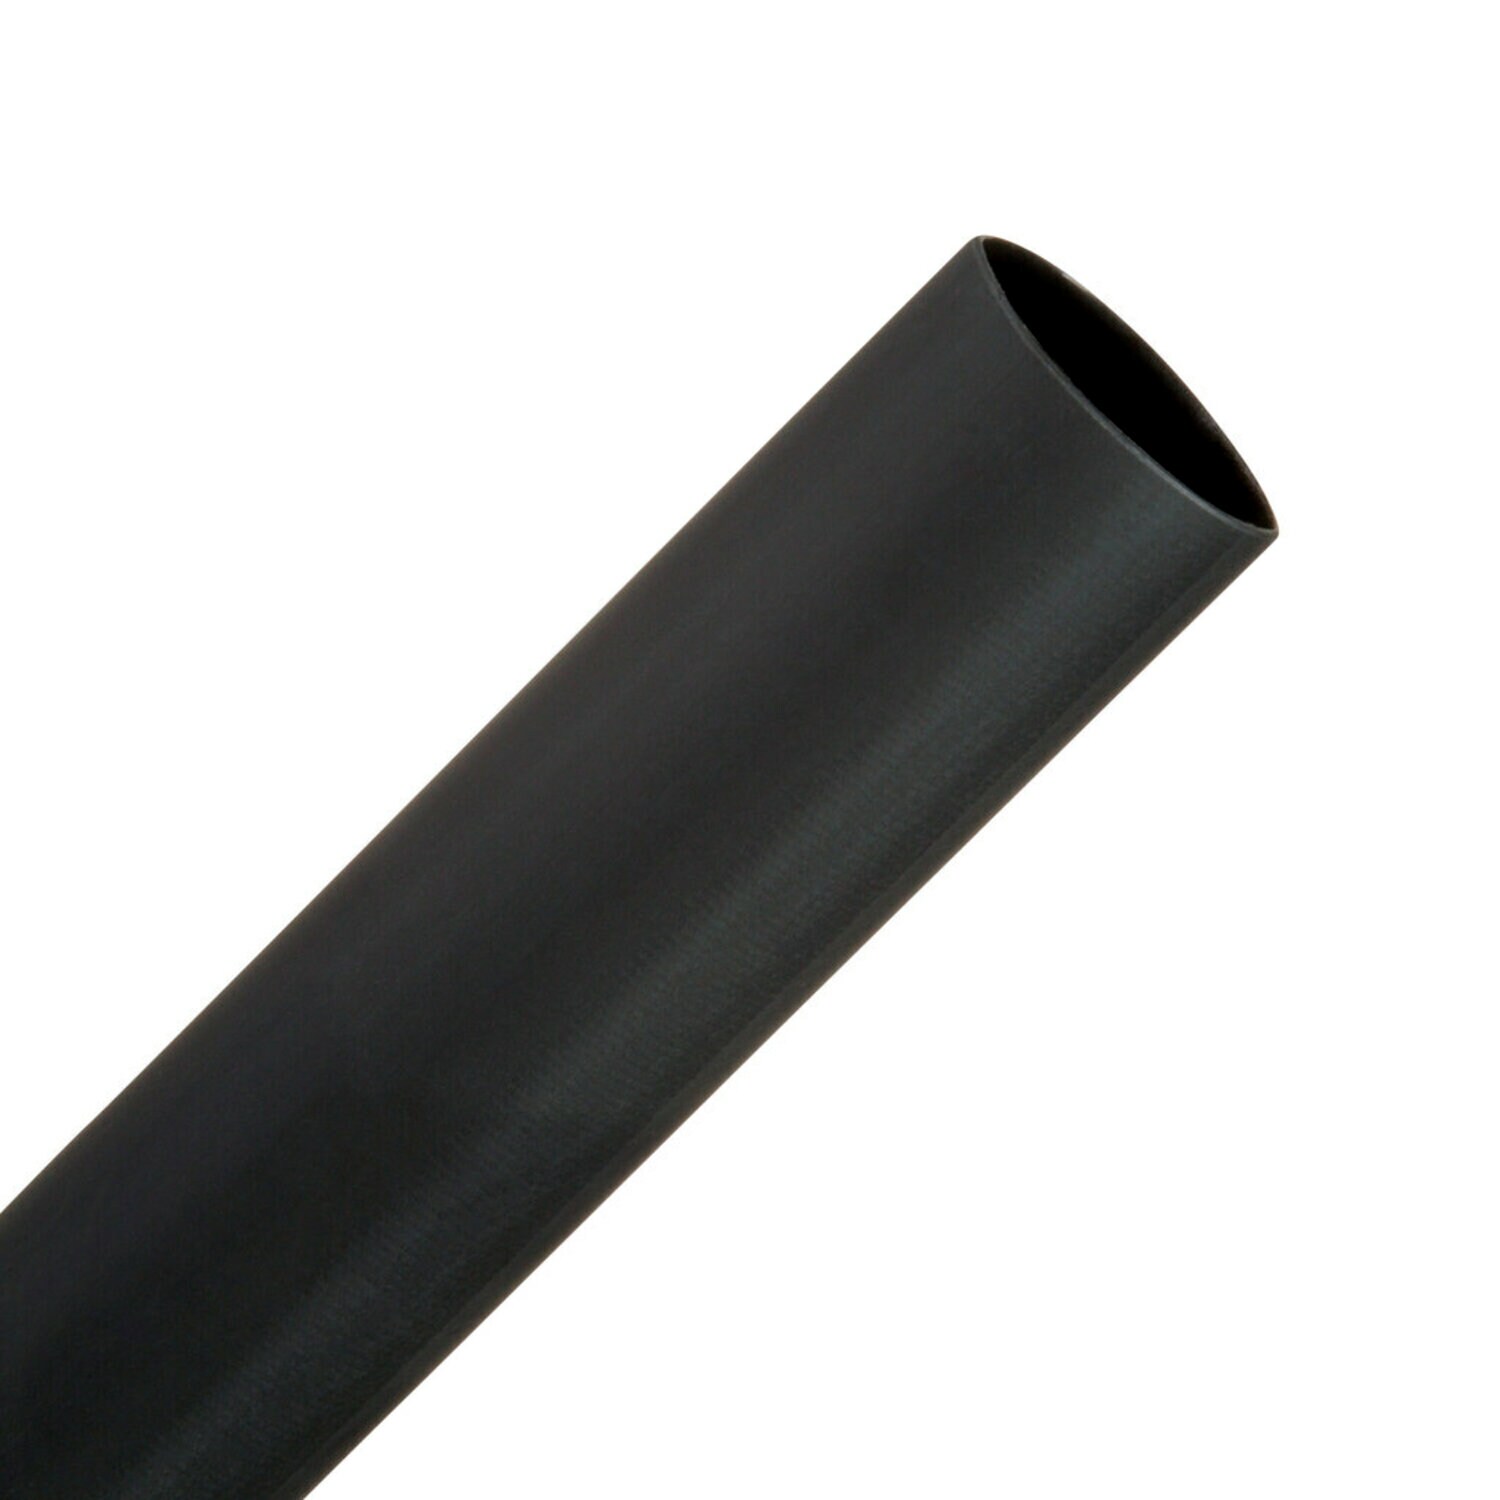 7000133585 - 3M Thin-Wall Heat Shrink Tubing EPS-300, Adhesive-Lined, 1-48"-Black-5
Pcs, 48 in length sticks, 5 pieces/case